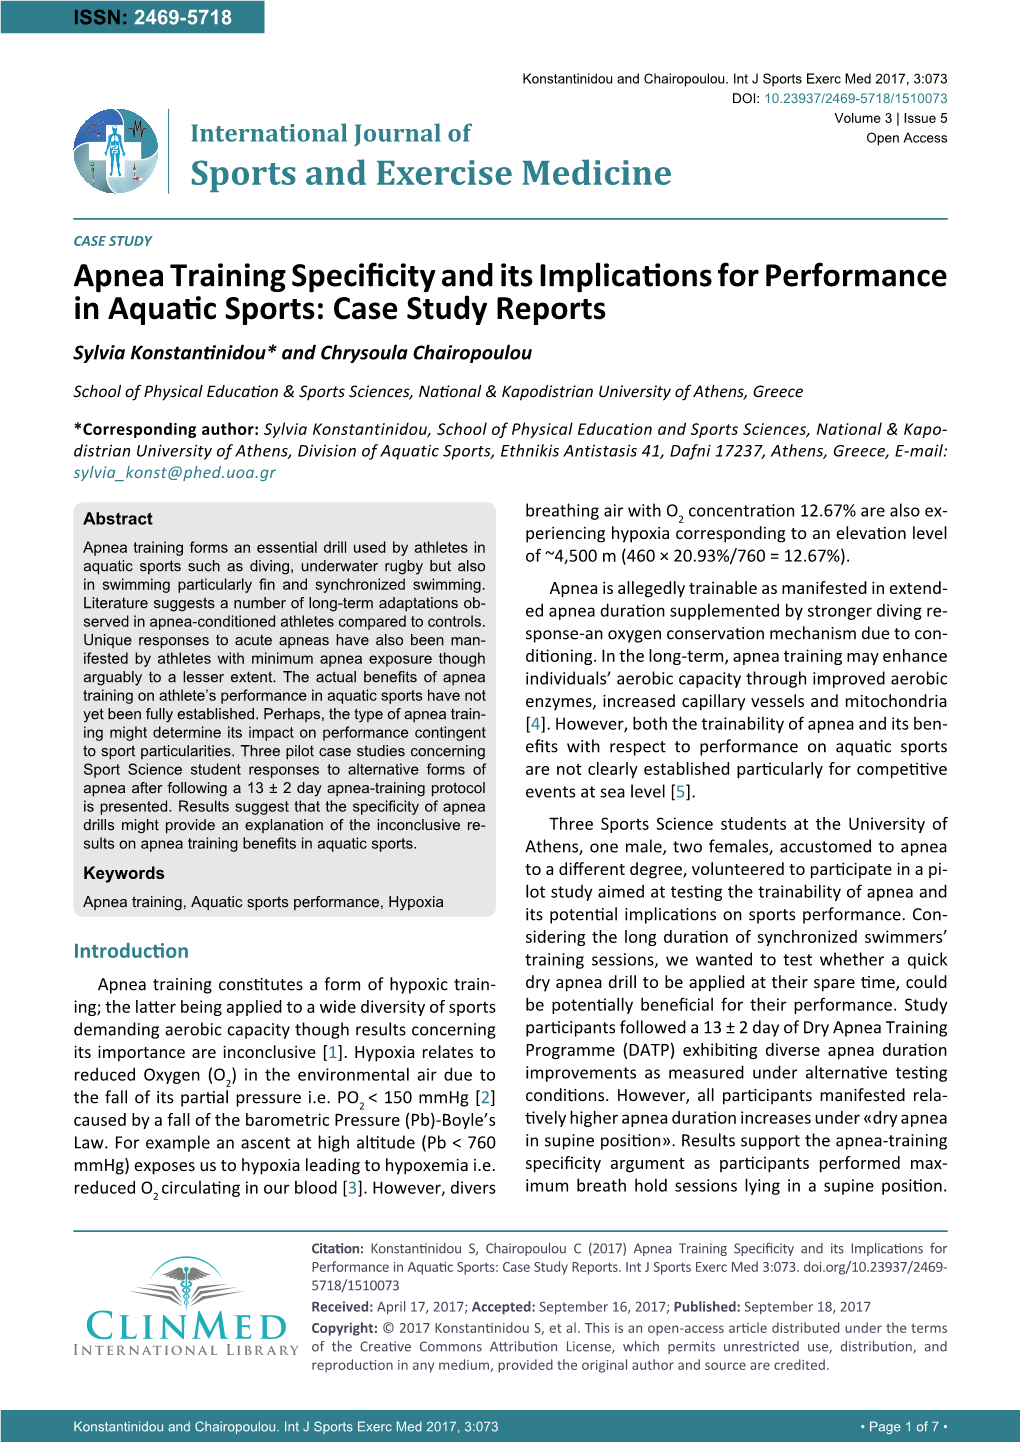 Apnea Training Specificity and Its Implications for Performance in Aquatic Sports: Case Study Reports Sylvia Konstantinidou* and Chrysoula Chairopoulou